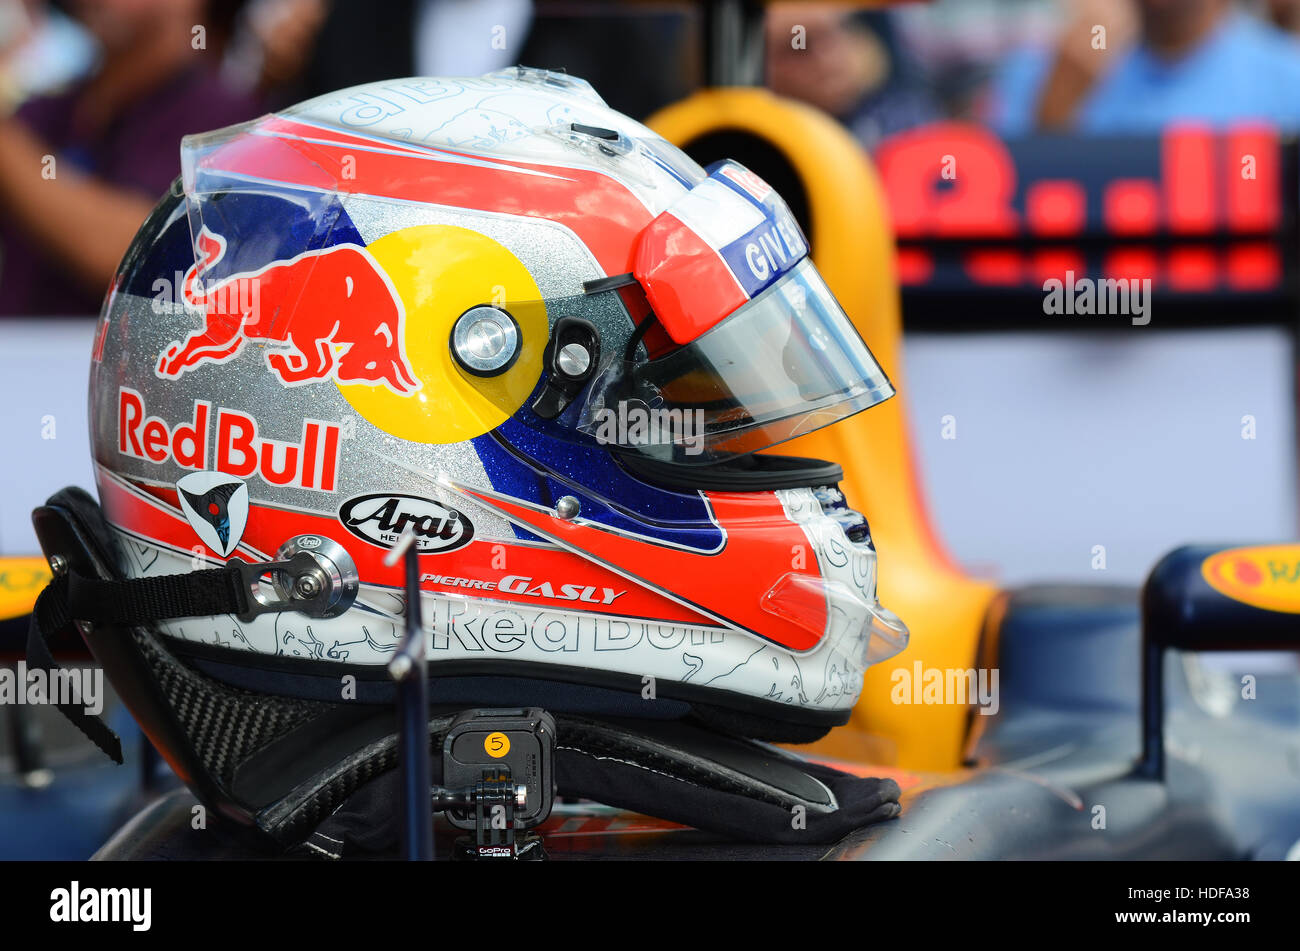 The helmet of Pierre Gasly who was preparing to drive a Red Bull Renault RB8 up the 2016 Goodwood Festival of Speed hill climb Stock Photo